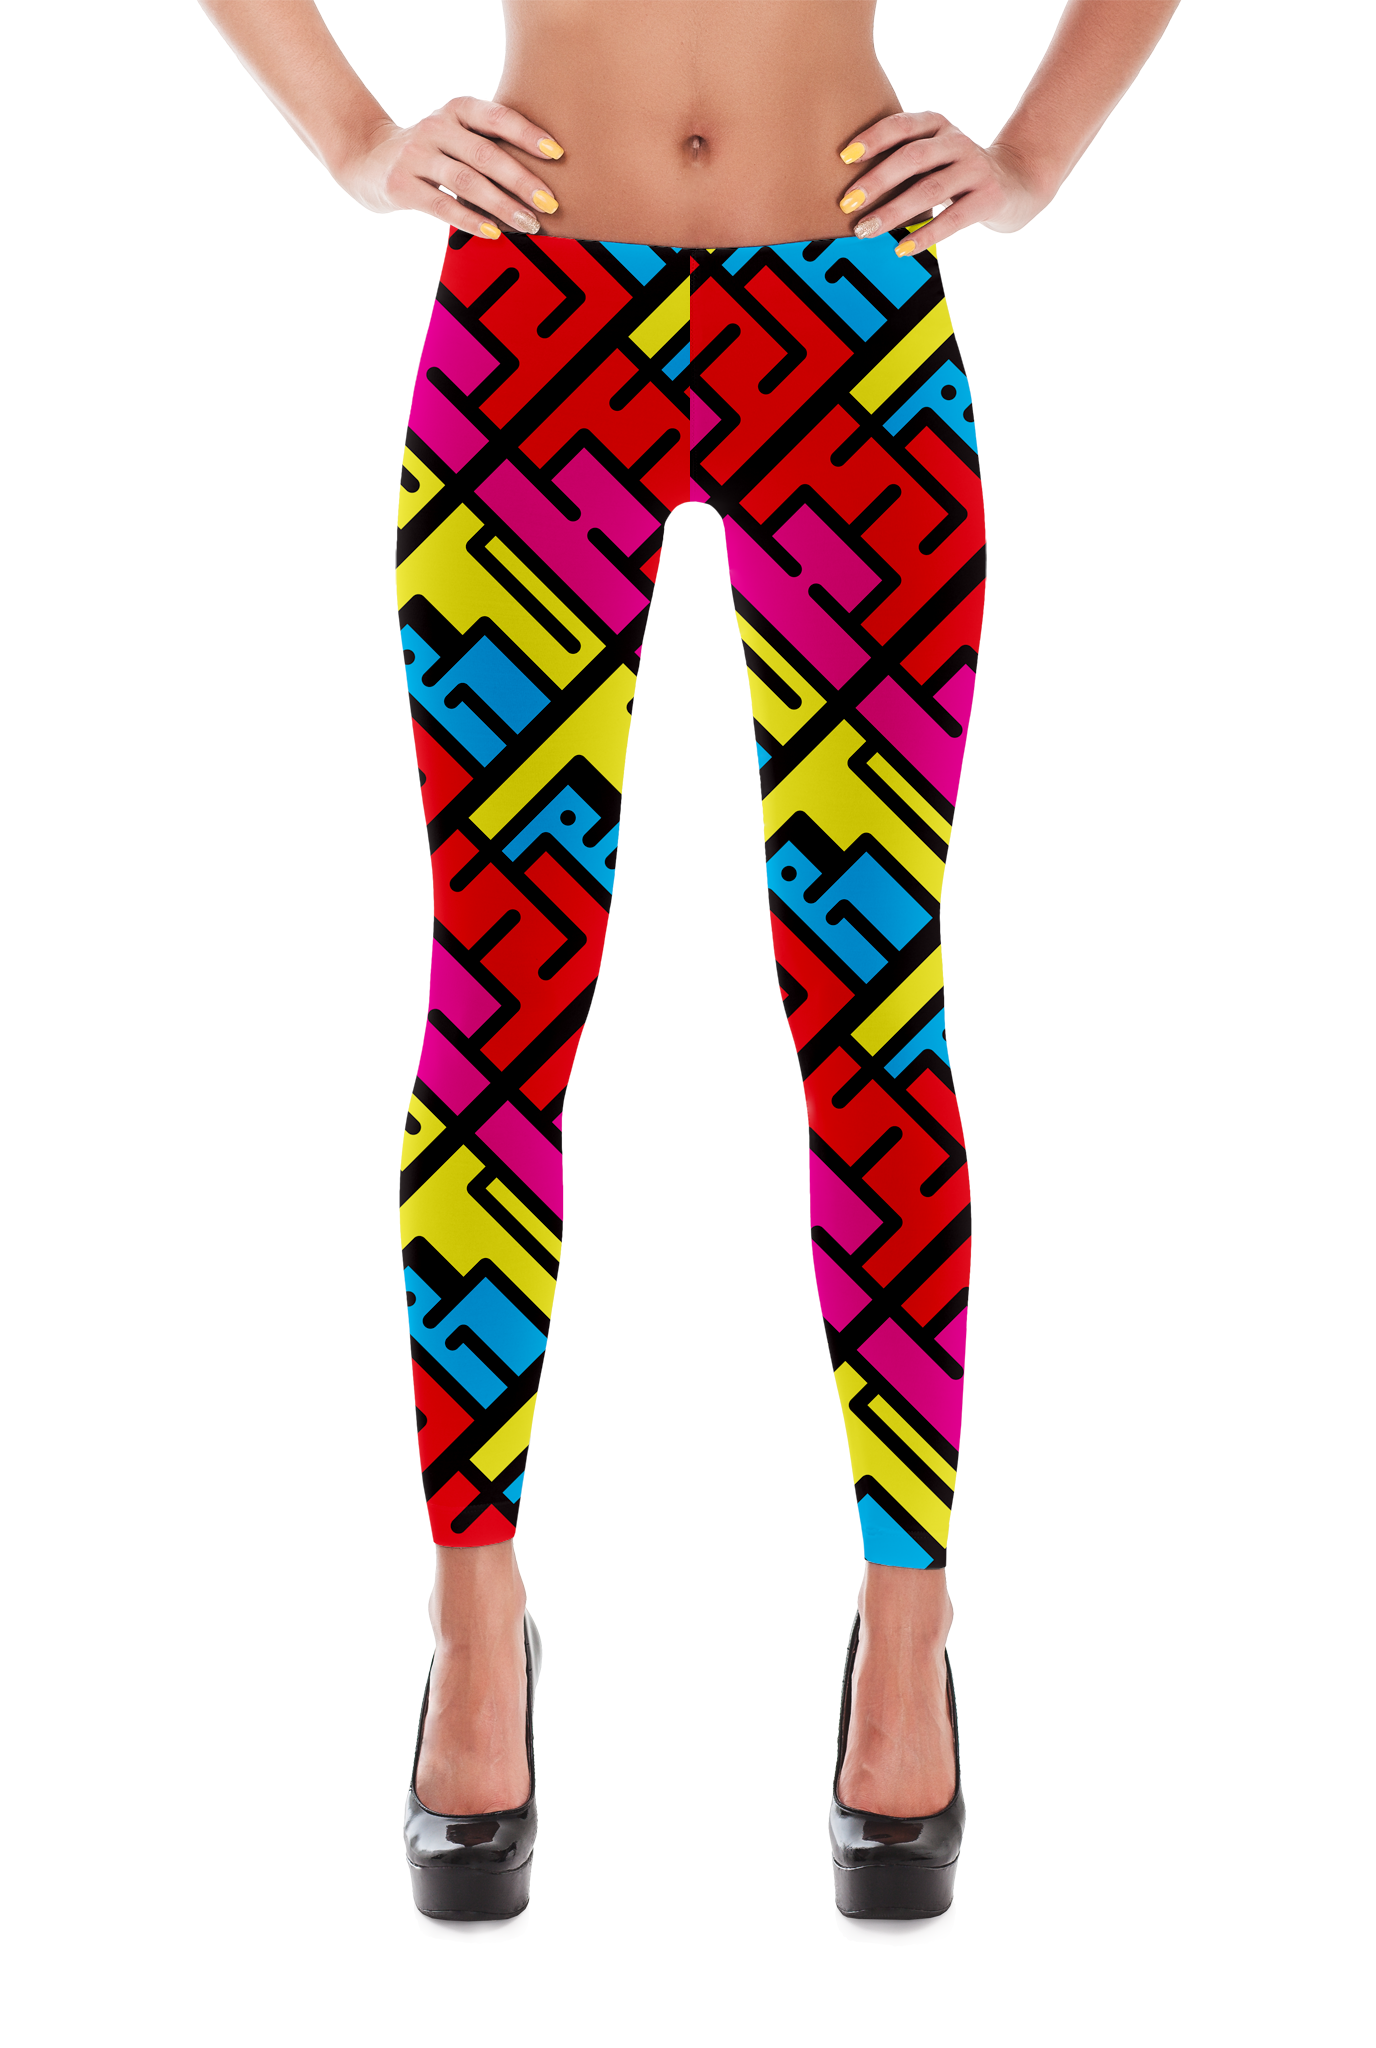 THE 90'S IS BACK YOGA PANTS